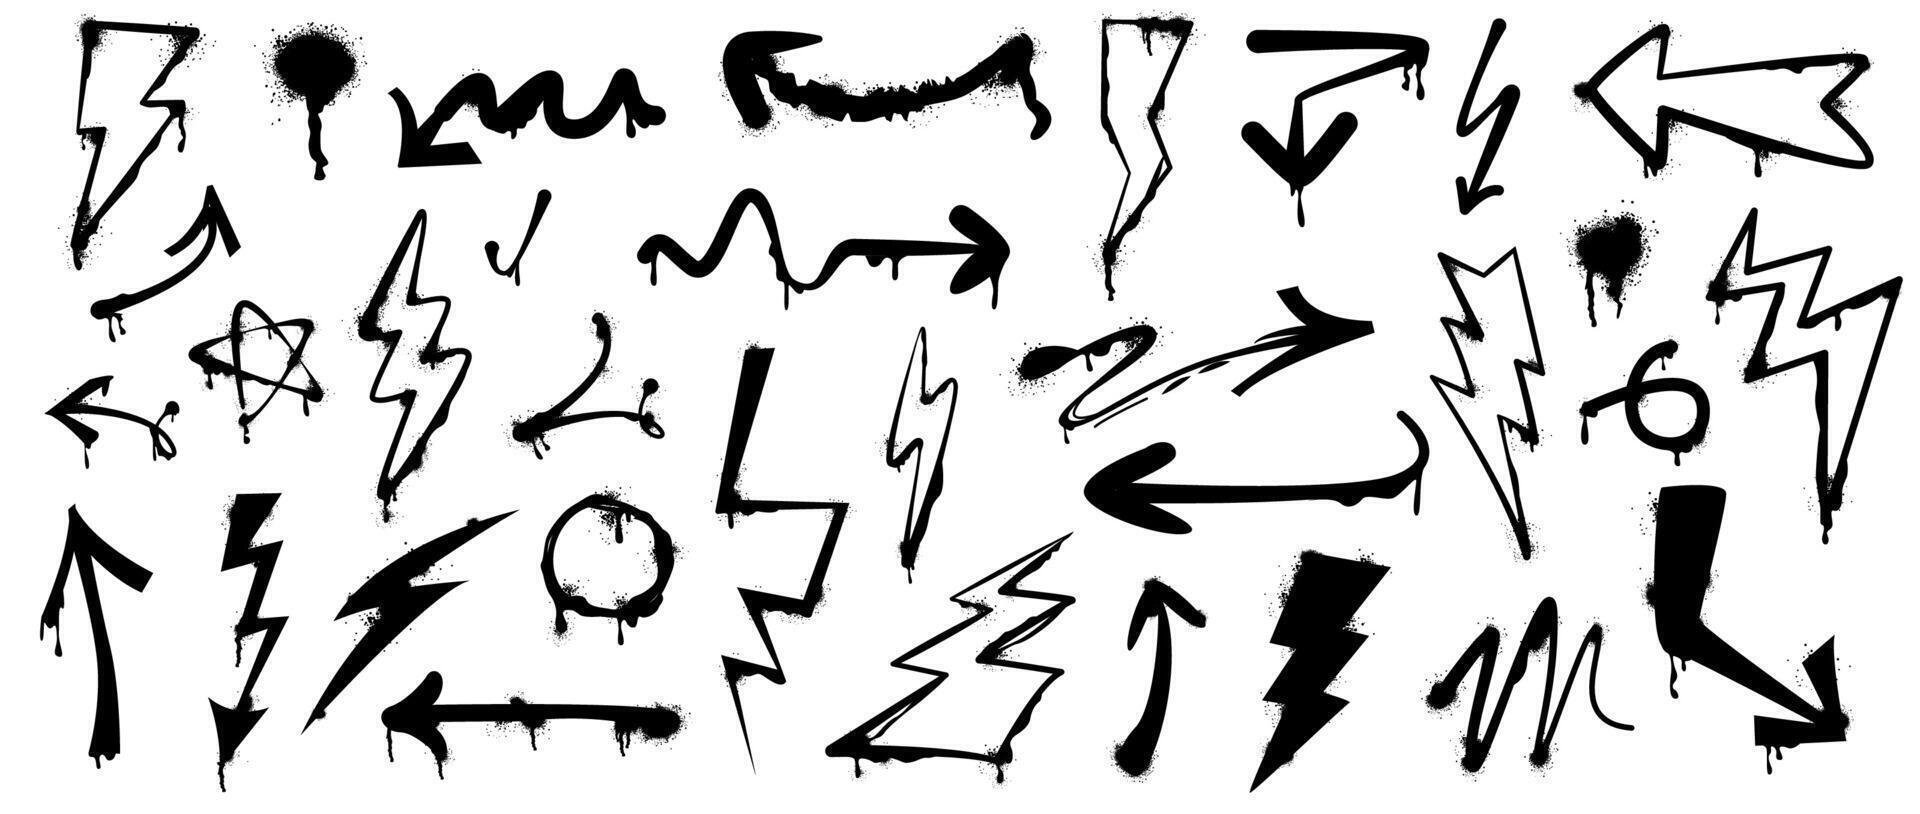 Set of spray paint arrows, drips and lightning bolts with graffiti effect. Black inky blots, thunder electricity symbol with ink splatters in urban street style. Brush lines and electric power sign vector